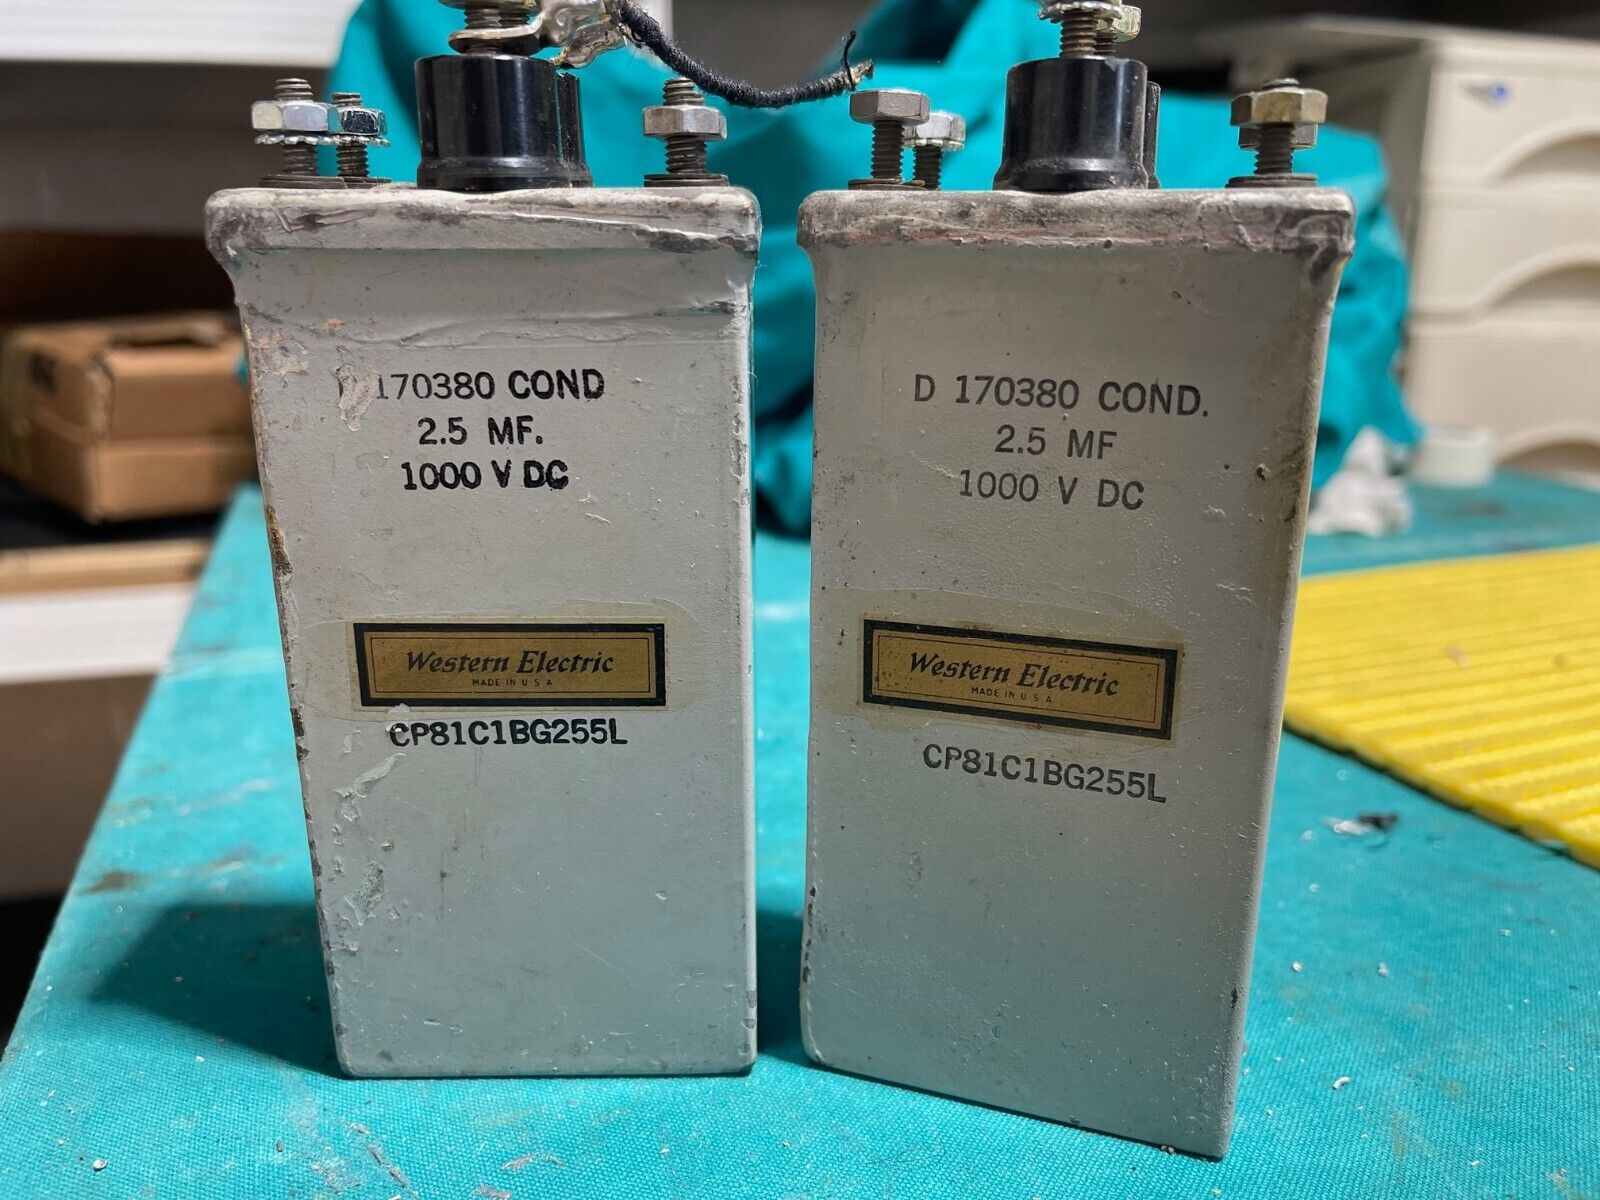 western electric oil capacitors 2,5mF 1000V couple